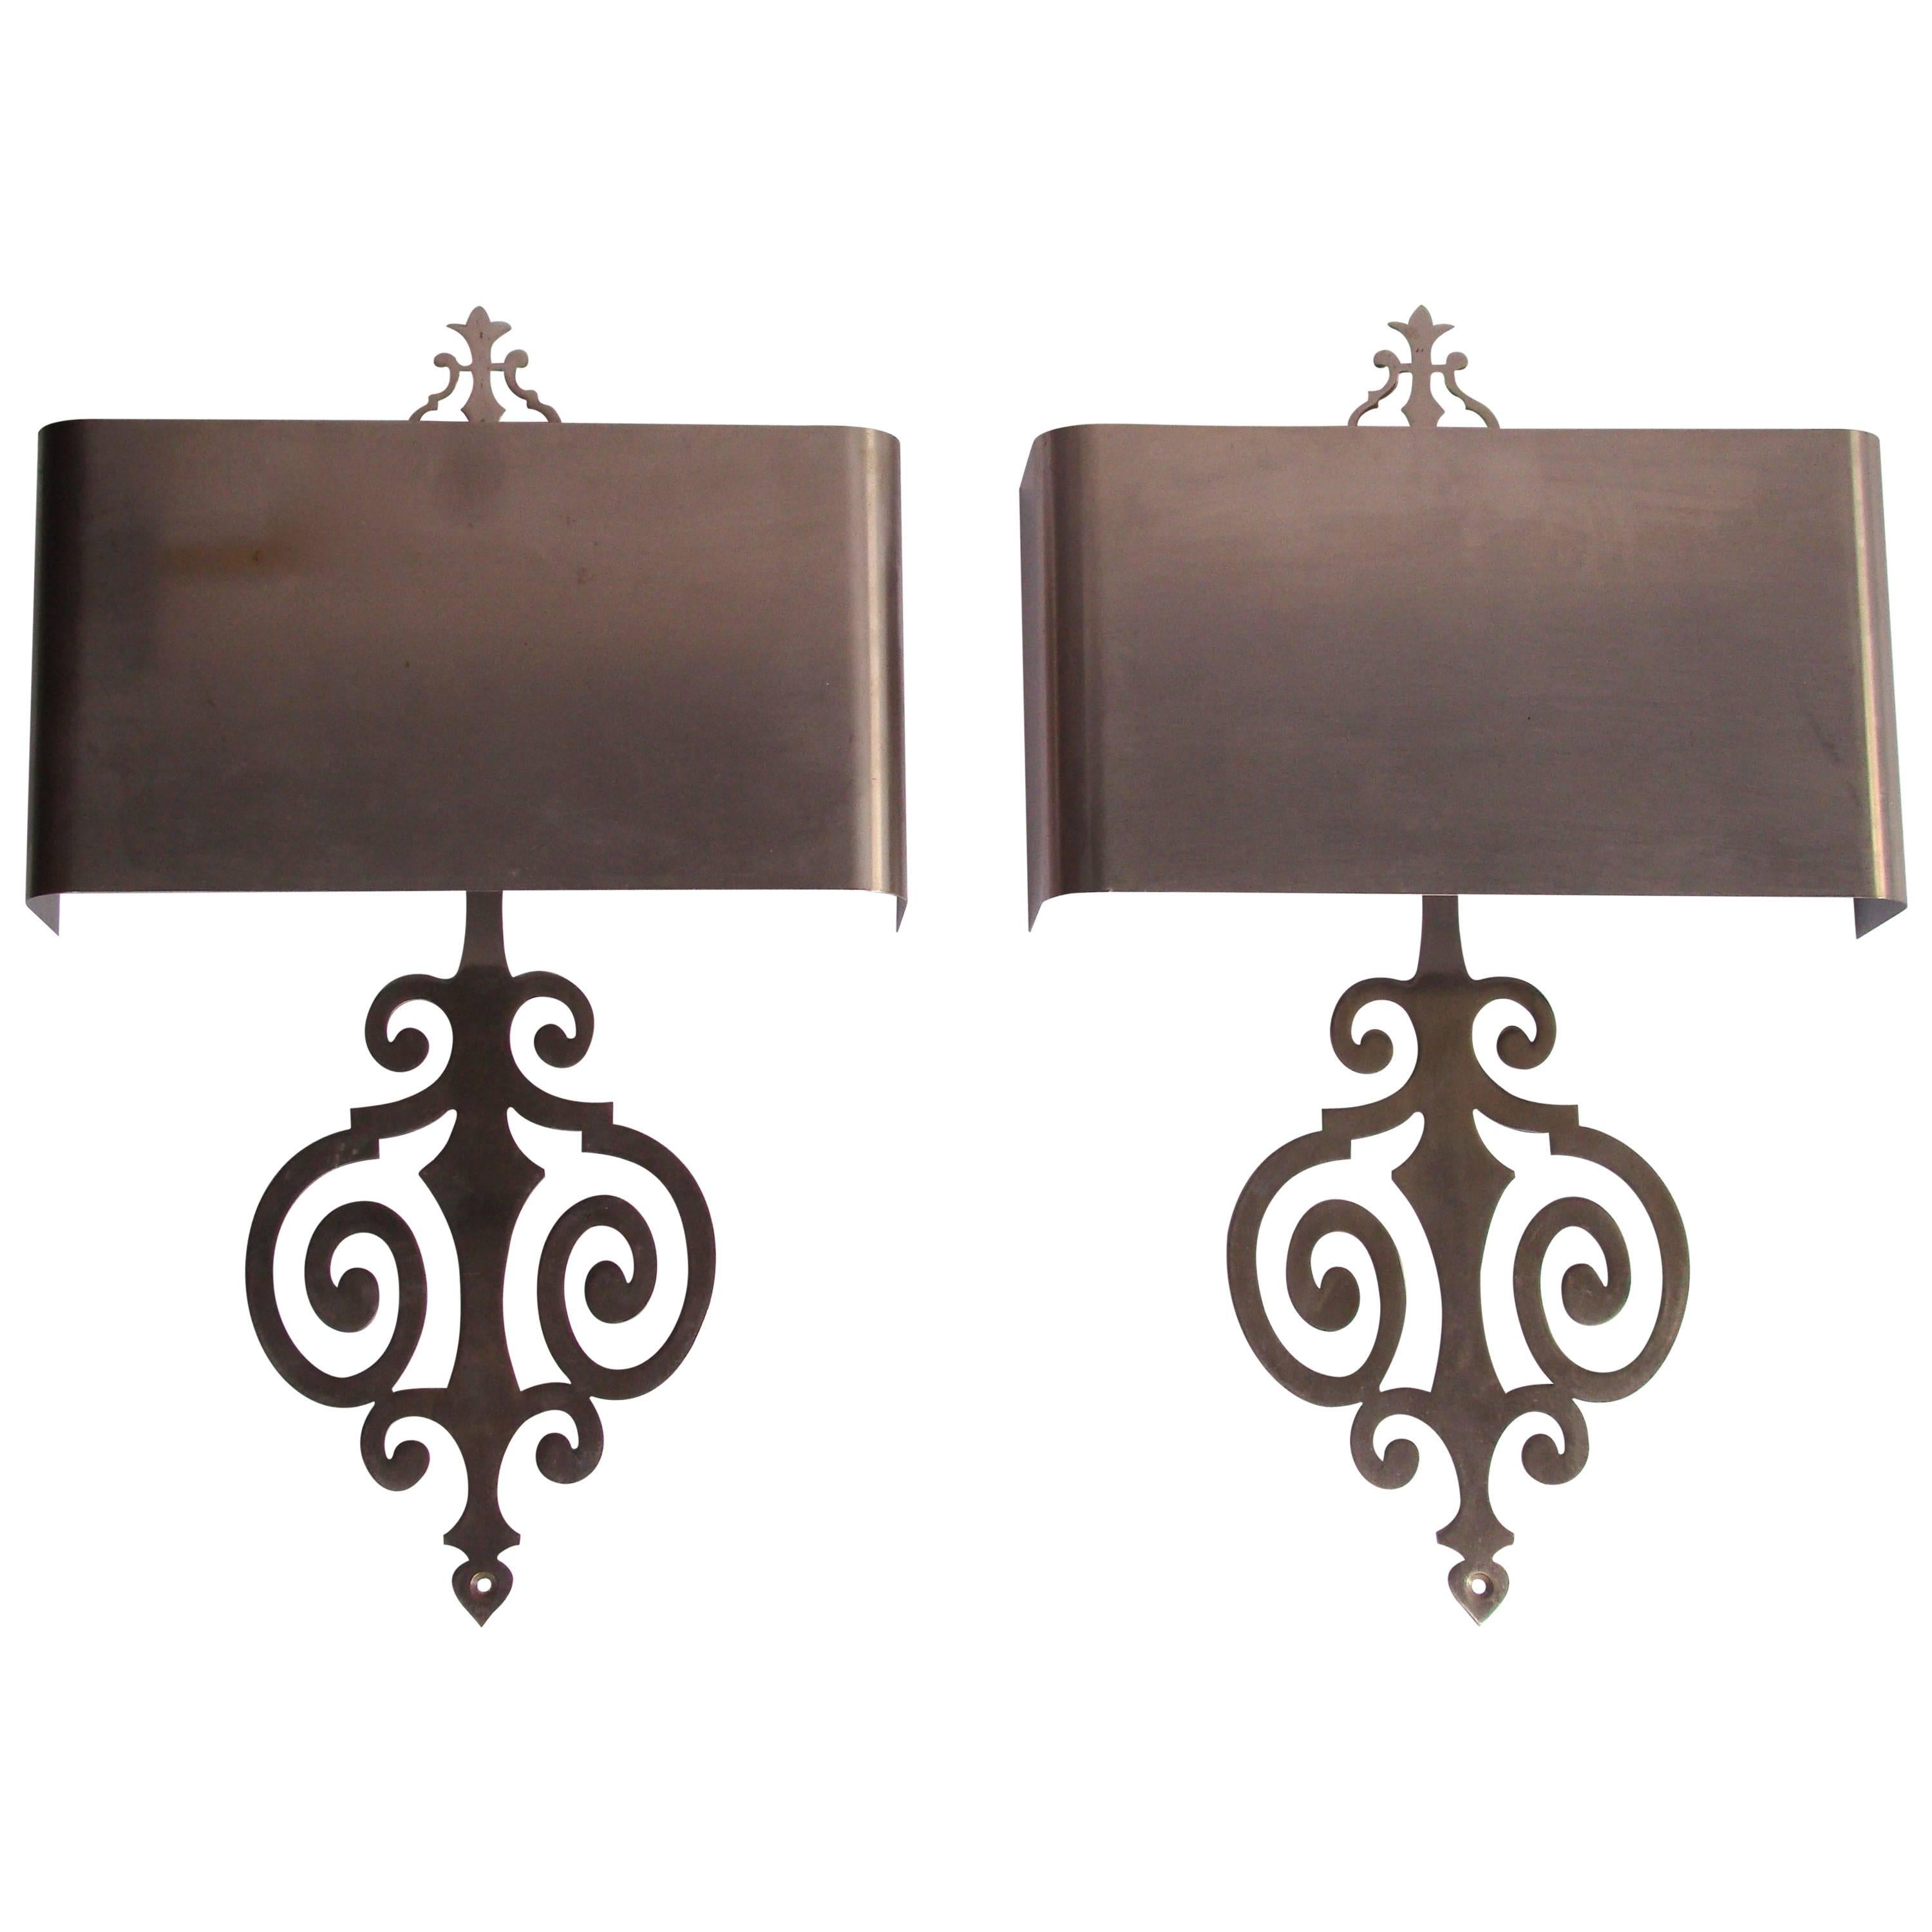 1970s Stainless Steel Pair of Sconces by Maison Charles For Sale